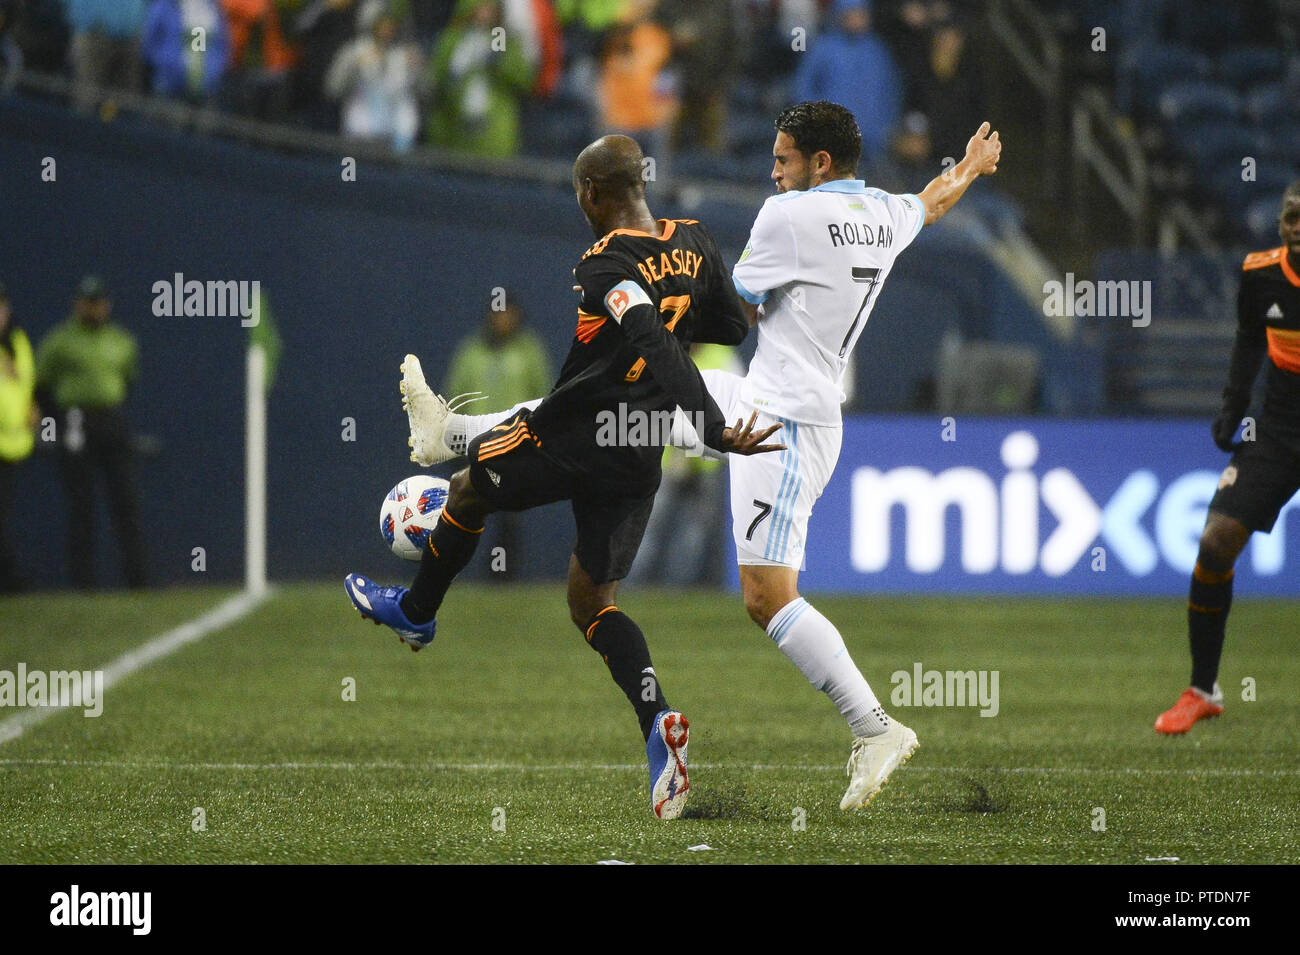 Seattle, Washington, USA. 8th Oct, 2018. Seattle's CRISTIAN ROLDAN (7) and Houston's DAMARCUS BEASLEY (7) battle for a loose ball as the Houston Dynamo visits the Seattle Sounders in a MLS match at Century Link Field in Seattle, WA. Credit: Jeff Halstead/ZUMA Wire/Alamy Live News Stock Photo